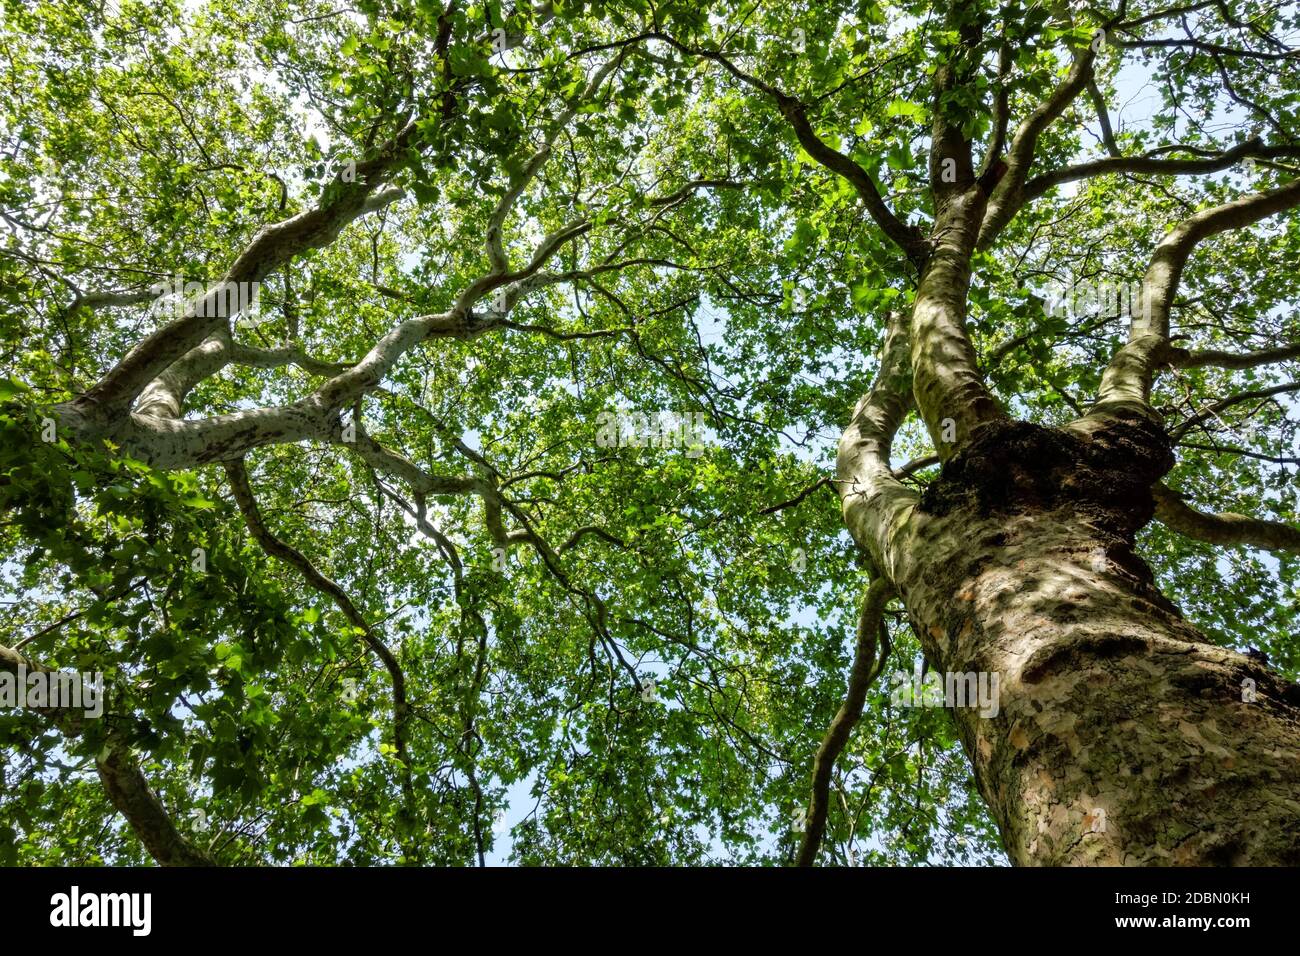 Branches of London planes full of green leaves Stock Photo